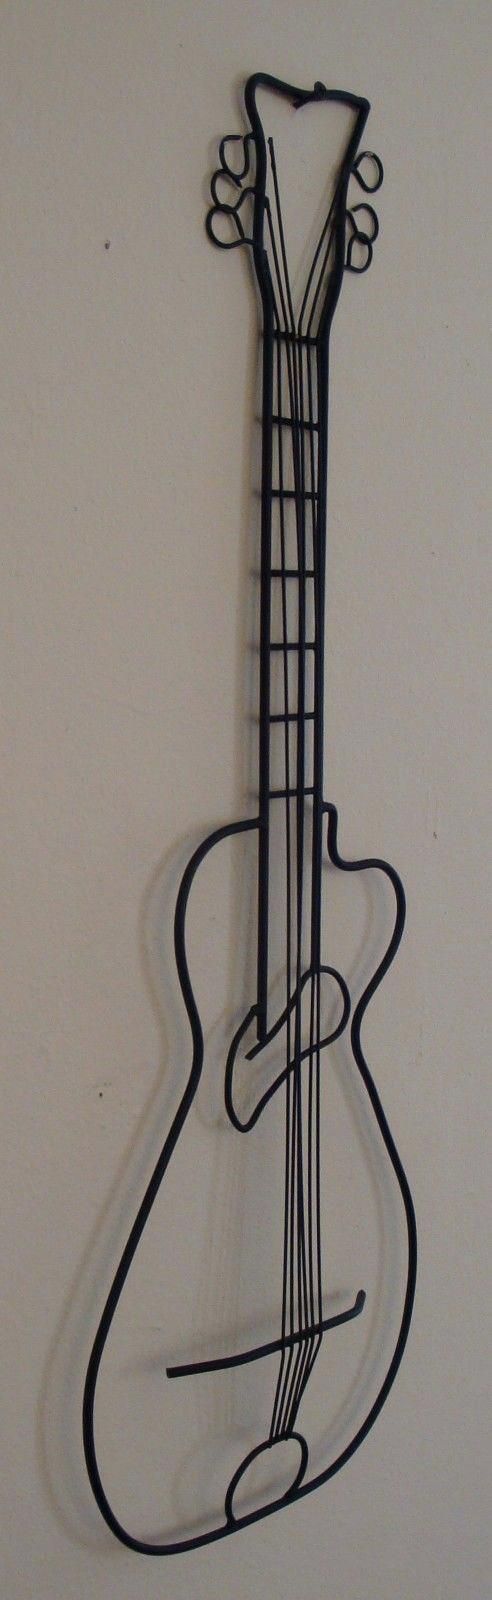 Wall Ideas : Music Wall Art Stickers Uk Hanging Music Notes Wall Intended For Metal Music Notes Wall Art (View 18 of 20)